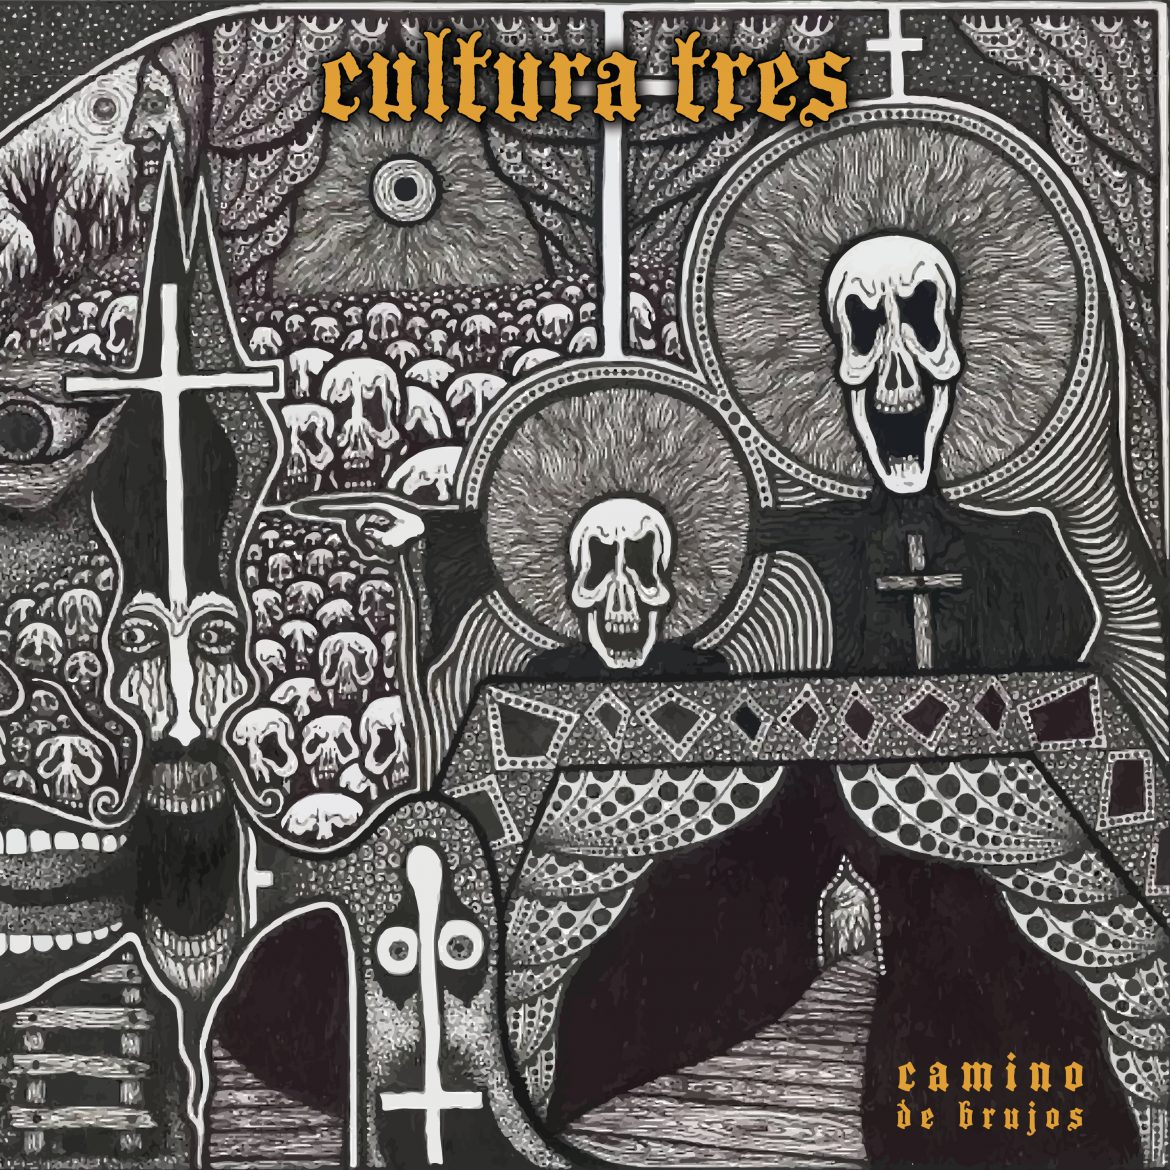 The new single ‘The Land’ from ‘Cultura Tres’ with its huge, distorted, melodious guitars is on the playlist now.